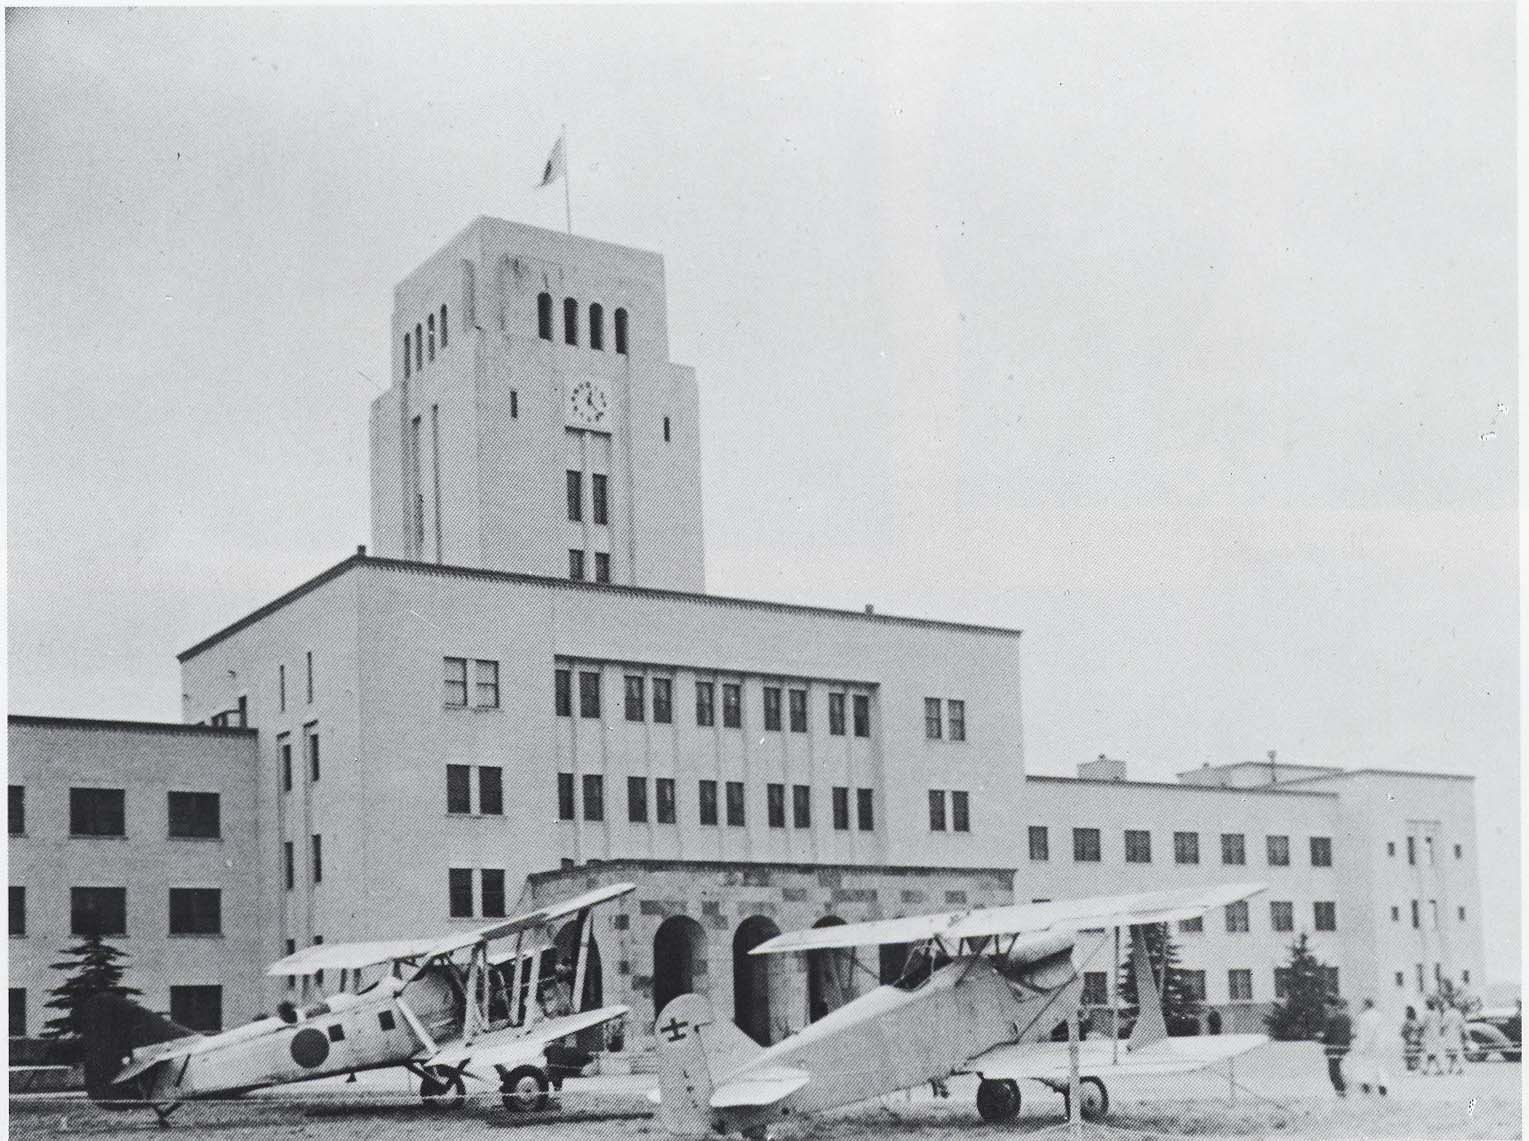 B2M (left) and another aircraft at rest before the main building of Tokyo Institute of Technology, Meguro, Tokyo, Japan, 1940; seen in the publication 'Youth of the Old University System' dated 20 Jan 1984